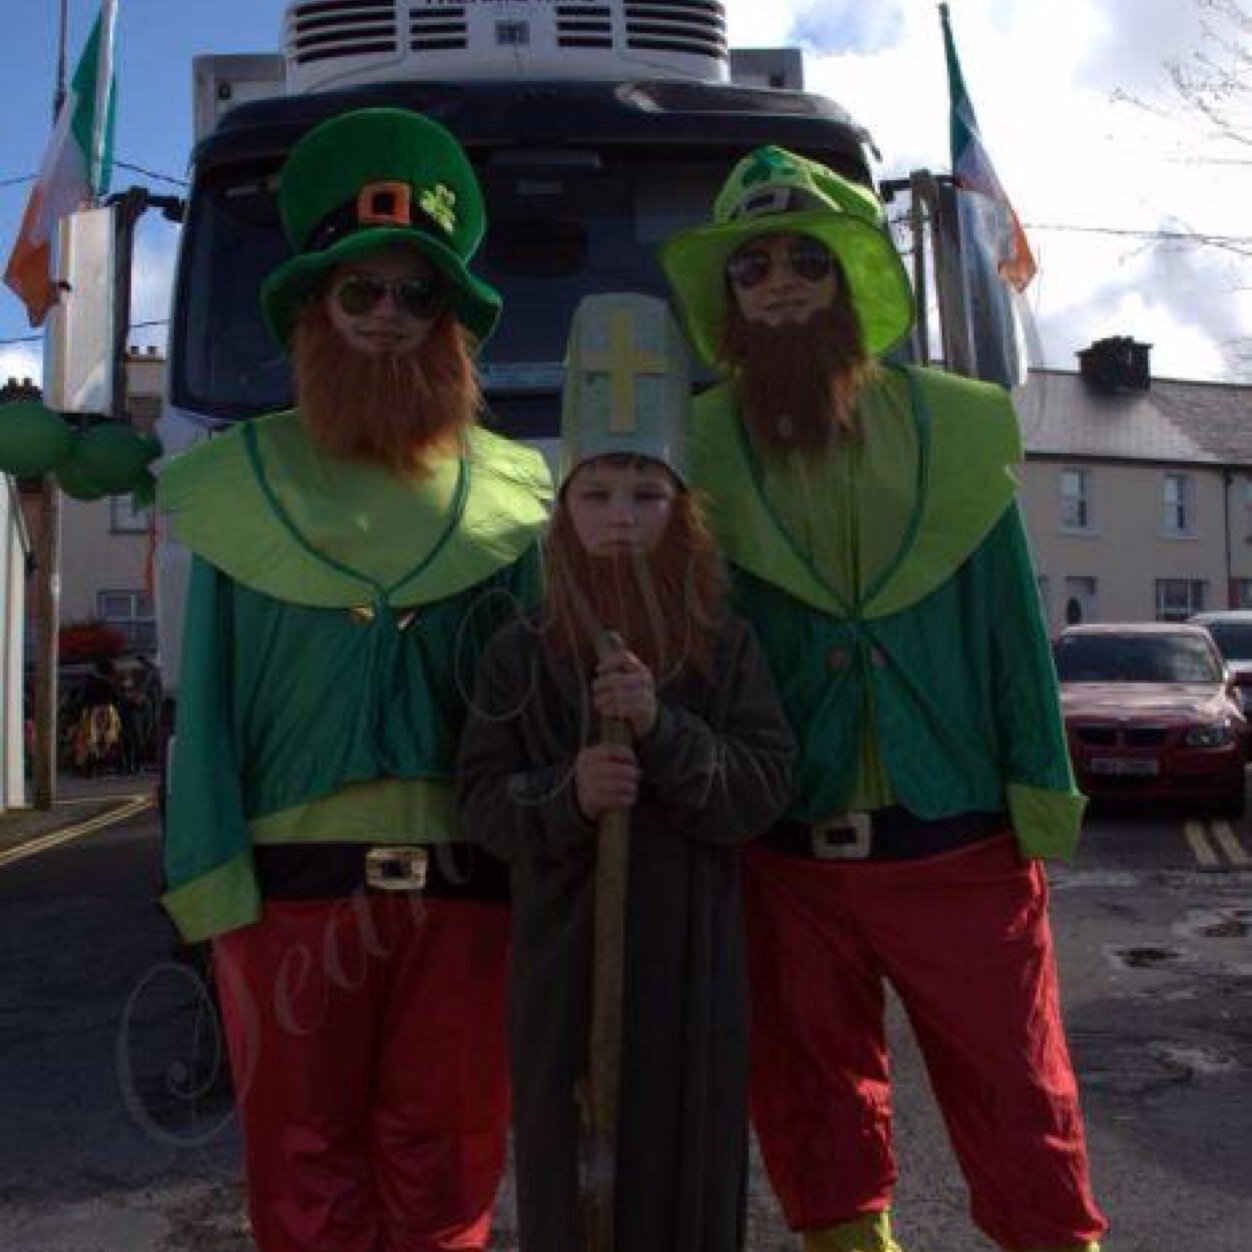 Castletownbere Beara St. Patrick's Day Parade Saturday  17th March 2018  2pm to 5pm Great family fun day out Everyone Welcome!!